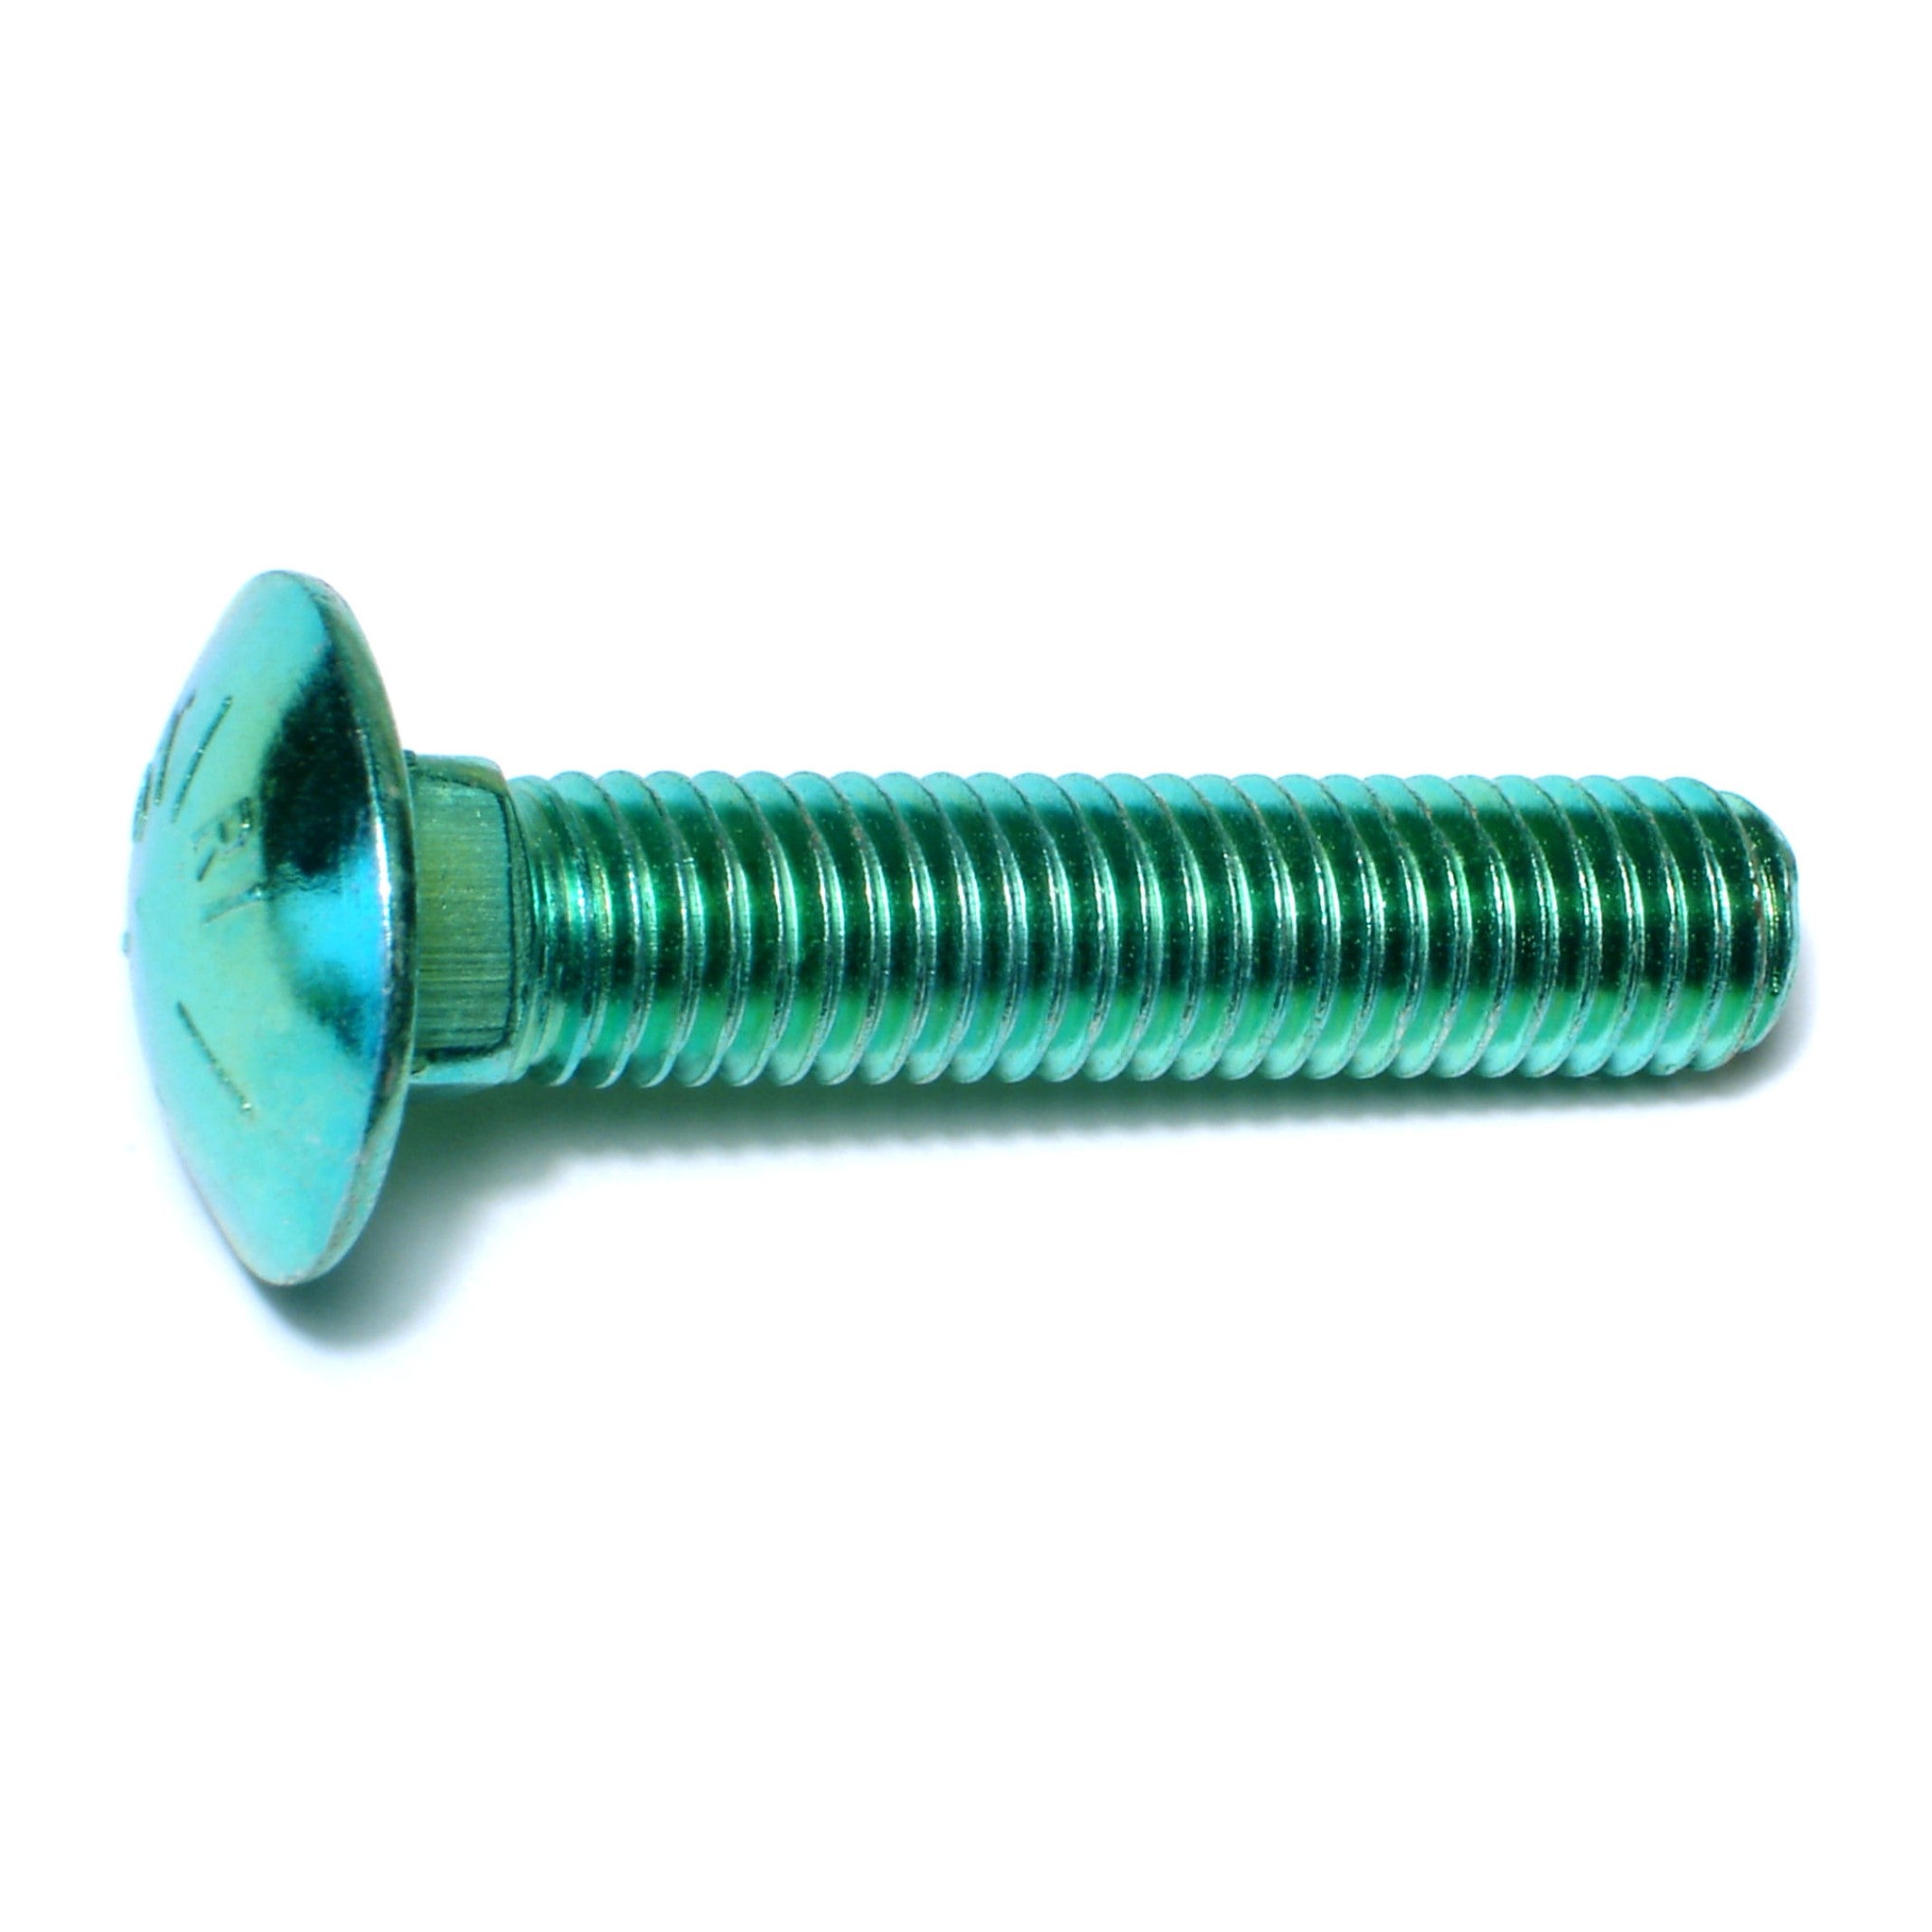 1/2"-13 x 2-1/2" Green Rinsed Zinc Plated Grade 5 Steel Coarse Thread Carriage Bolts